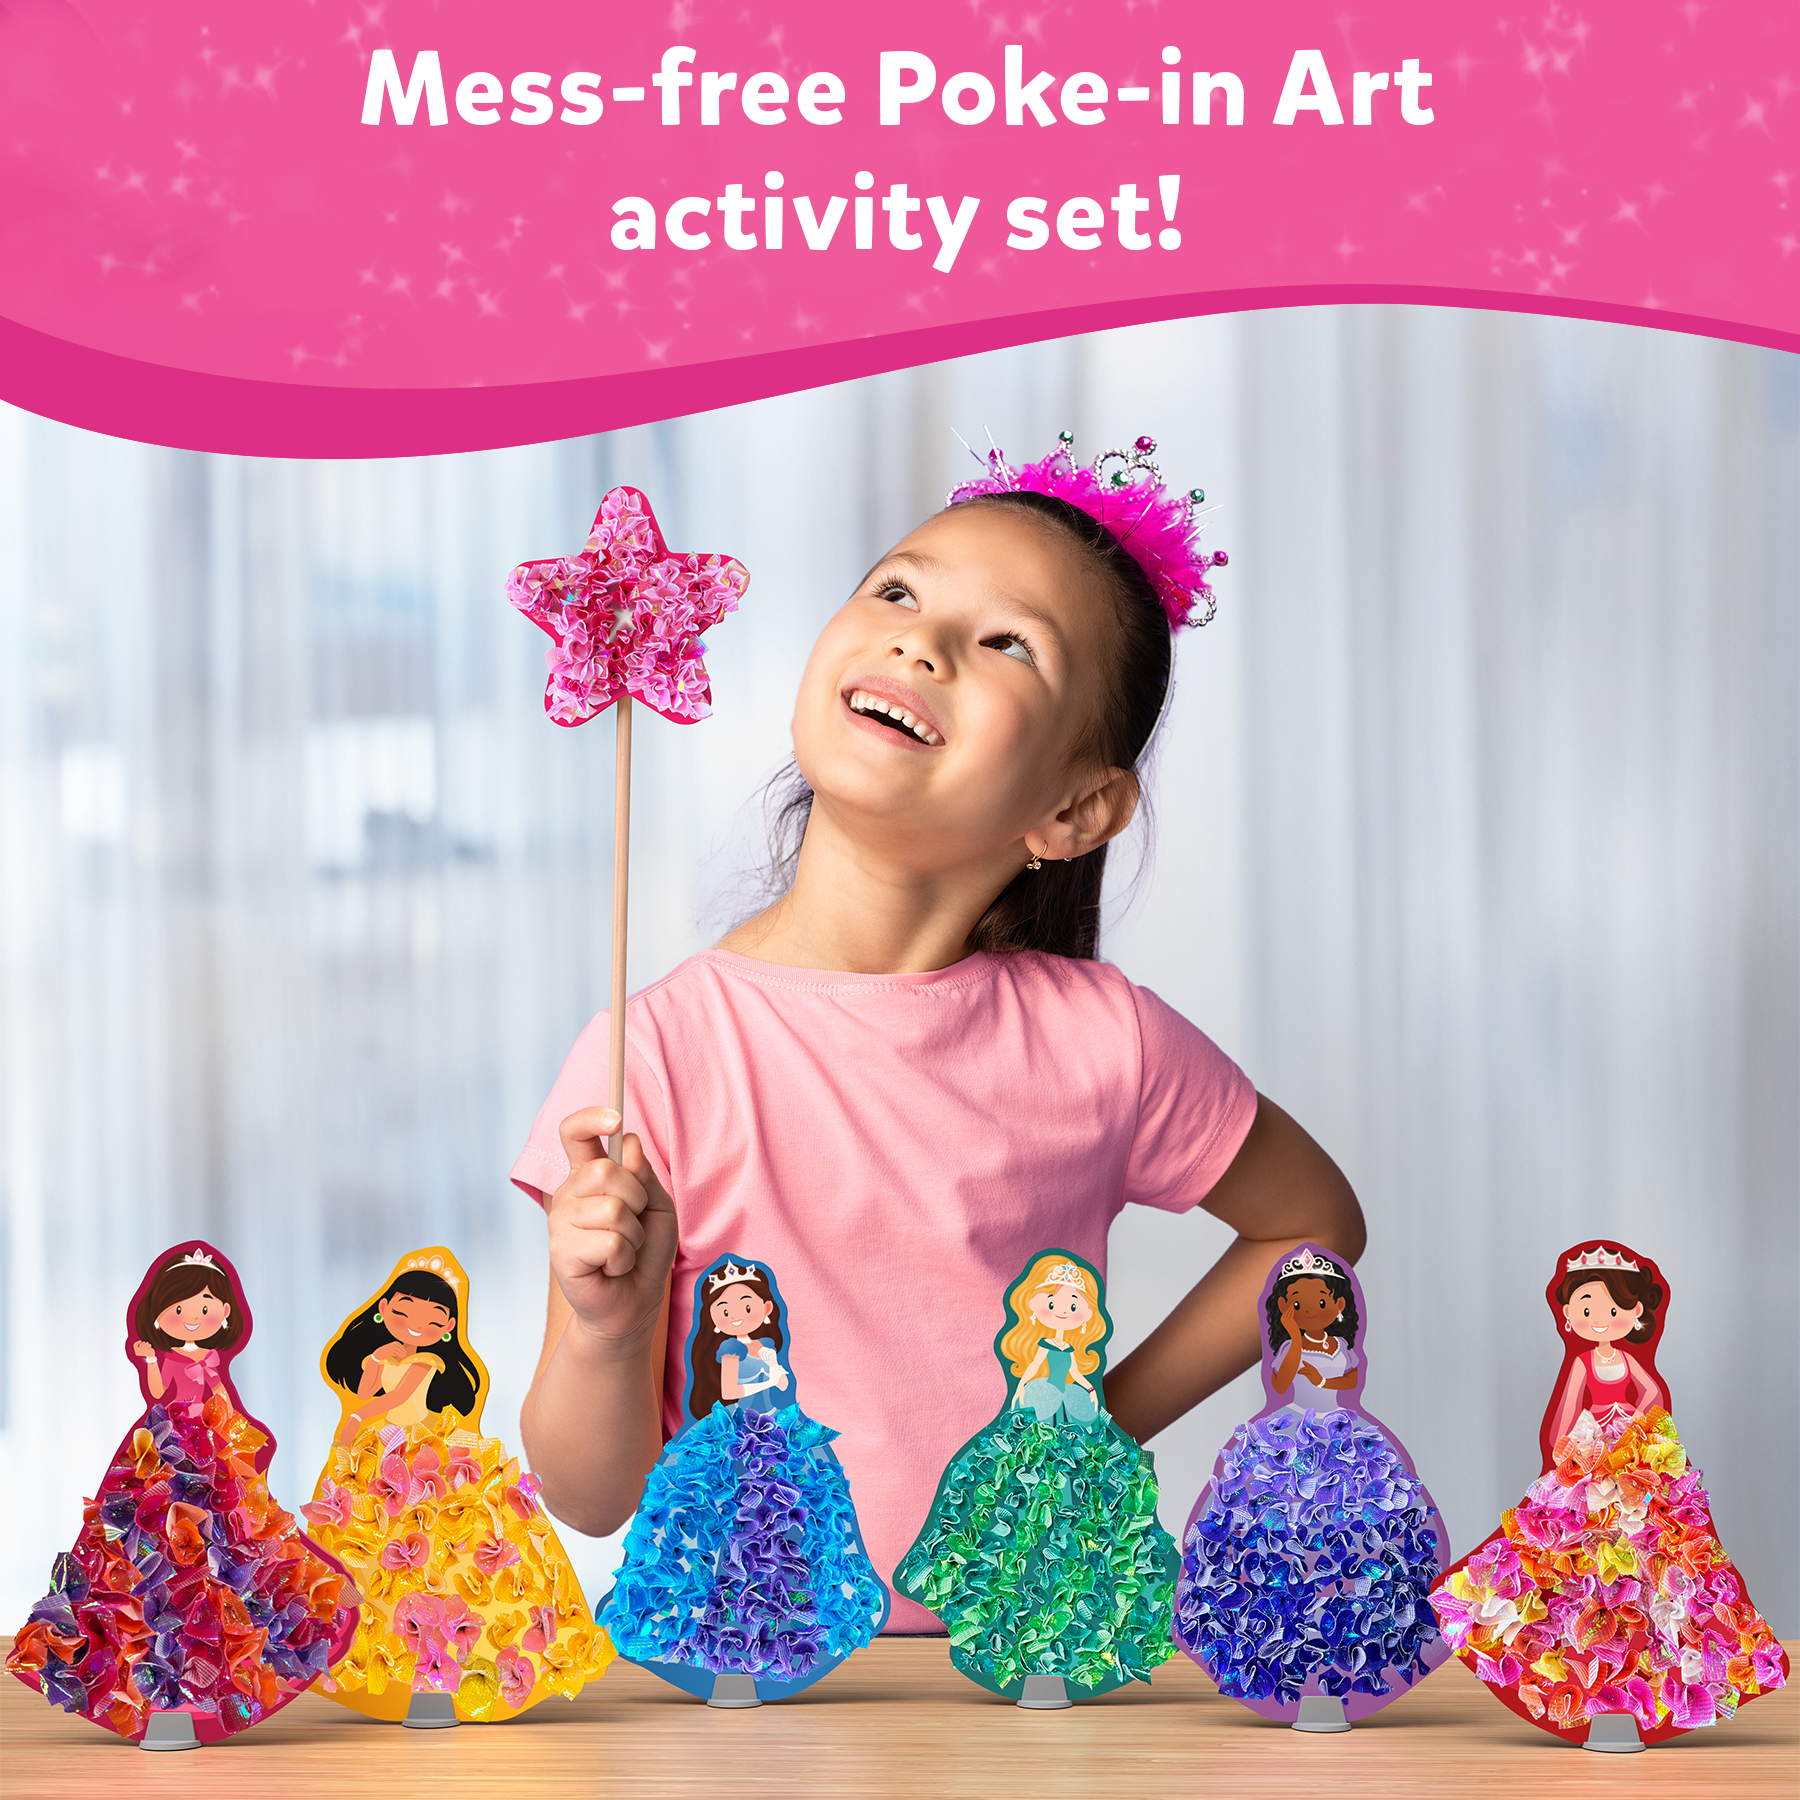 Skillmatics Art & Craft Activity - Poke-in Art Magical Princesses, Mess-Free Art for Kids, Craft Kits, DIY Activity, Gifts for Girls & Boys Ages 4, 5, 6, 7, 8, 9